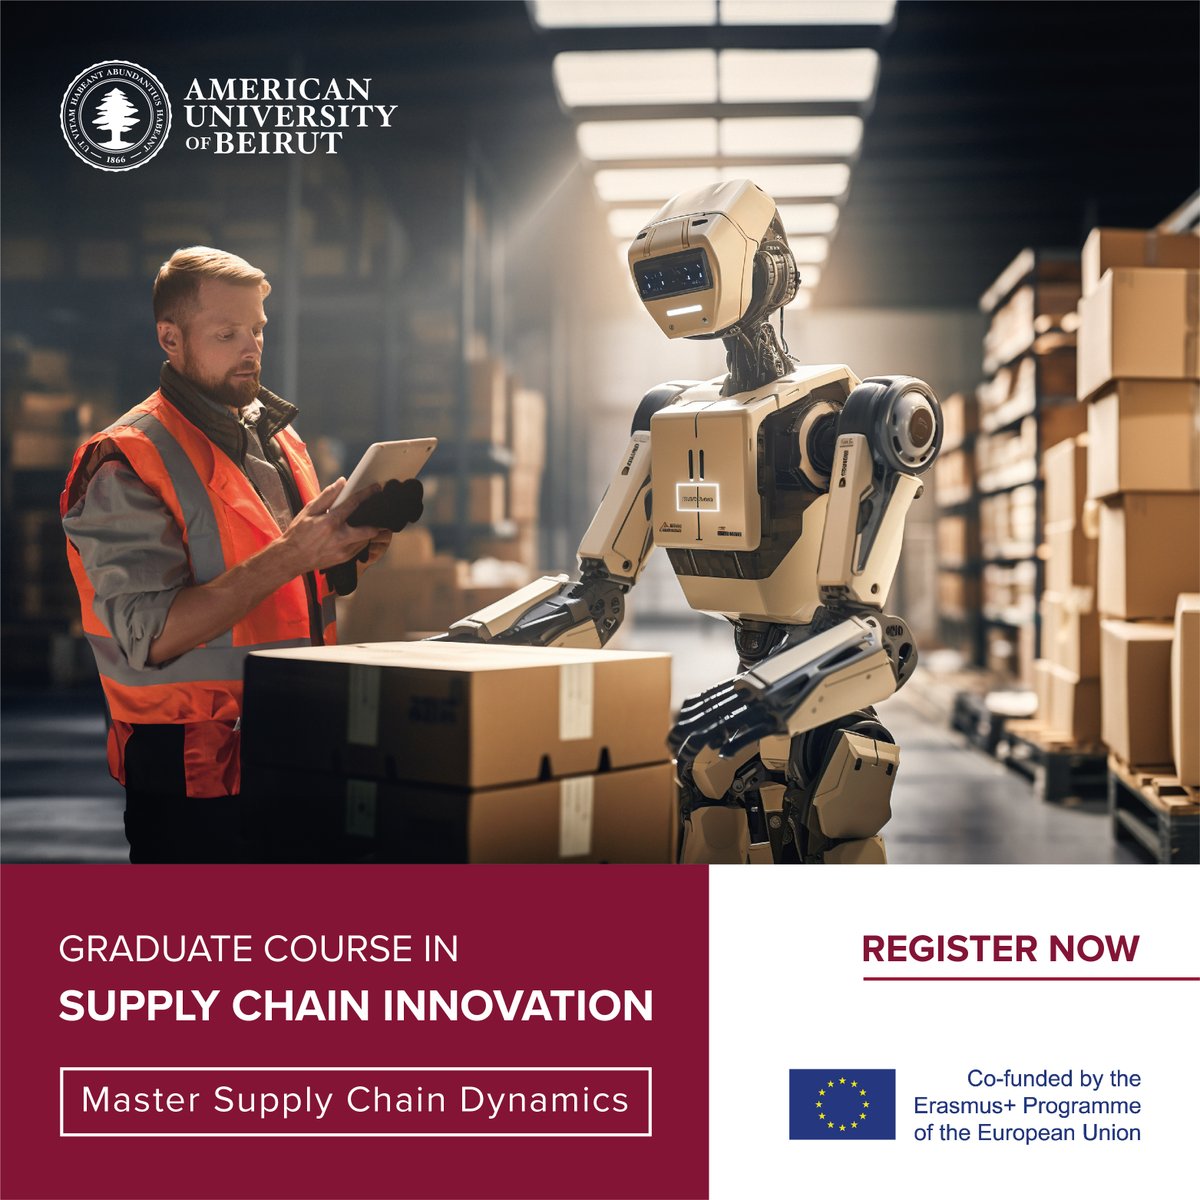 Register for our Supply Chain Innovation Graduate Course! bitly.ws/36yjj 🗓️ Date: April 17 - May 1, 2024 📍 Location: AUB Campus Register for six additional courses and earn a Professional Diploma in Global Supply Chain Management. @AUB_Lebanon